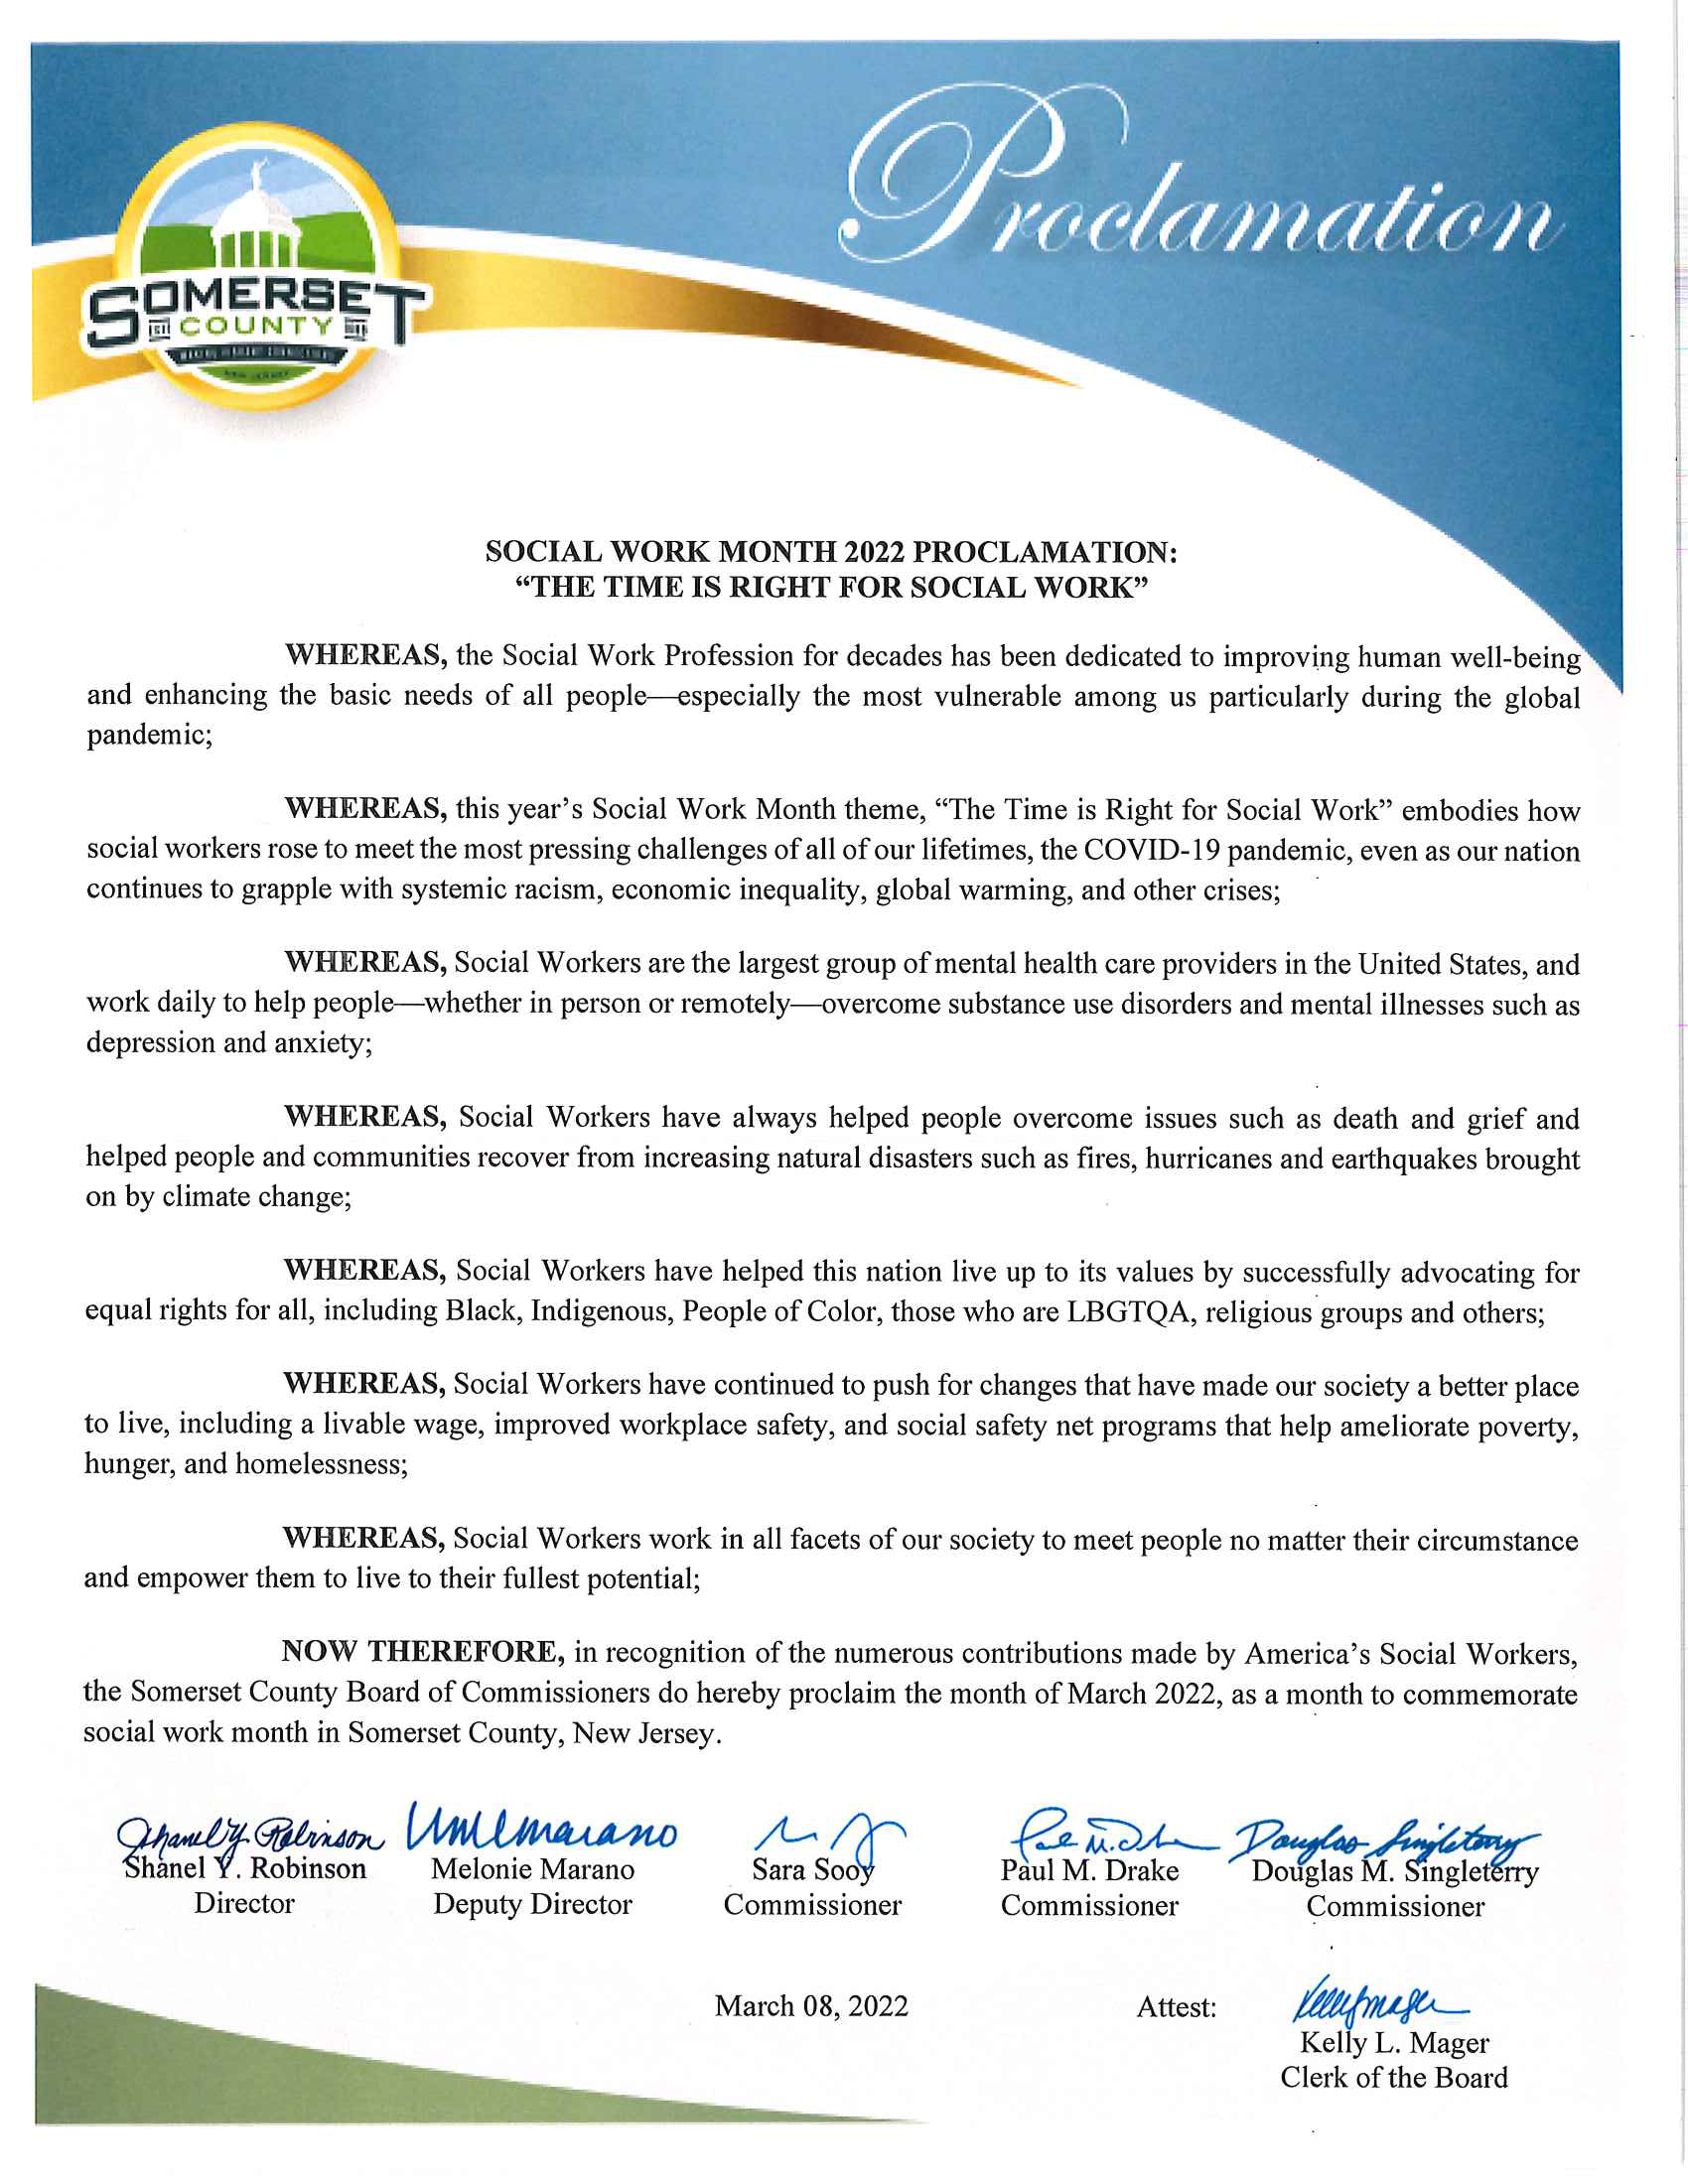 Social Work Month 2022 Proclamation